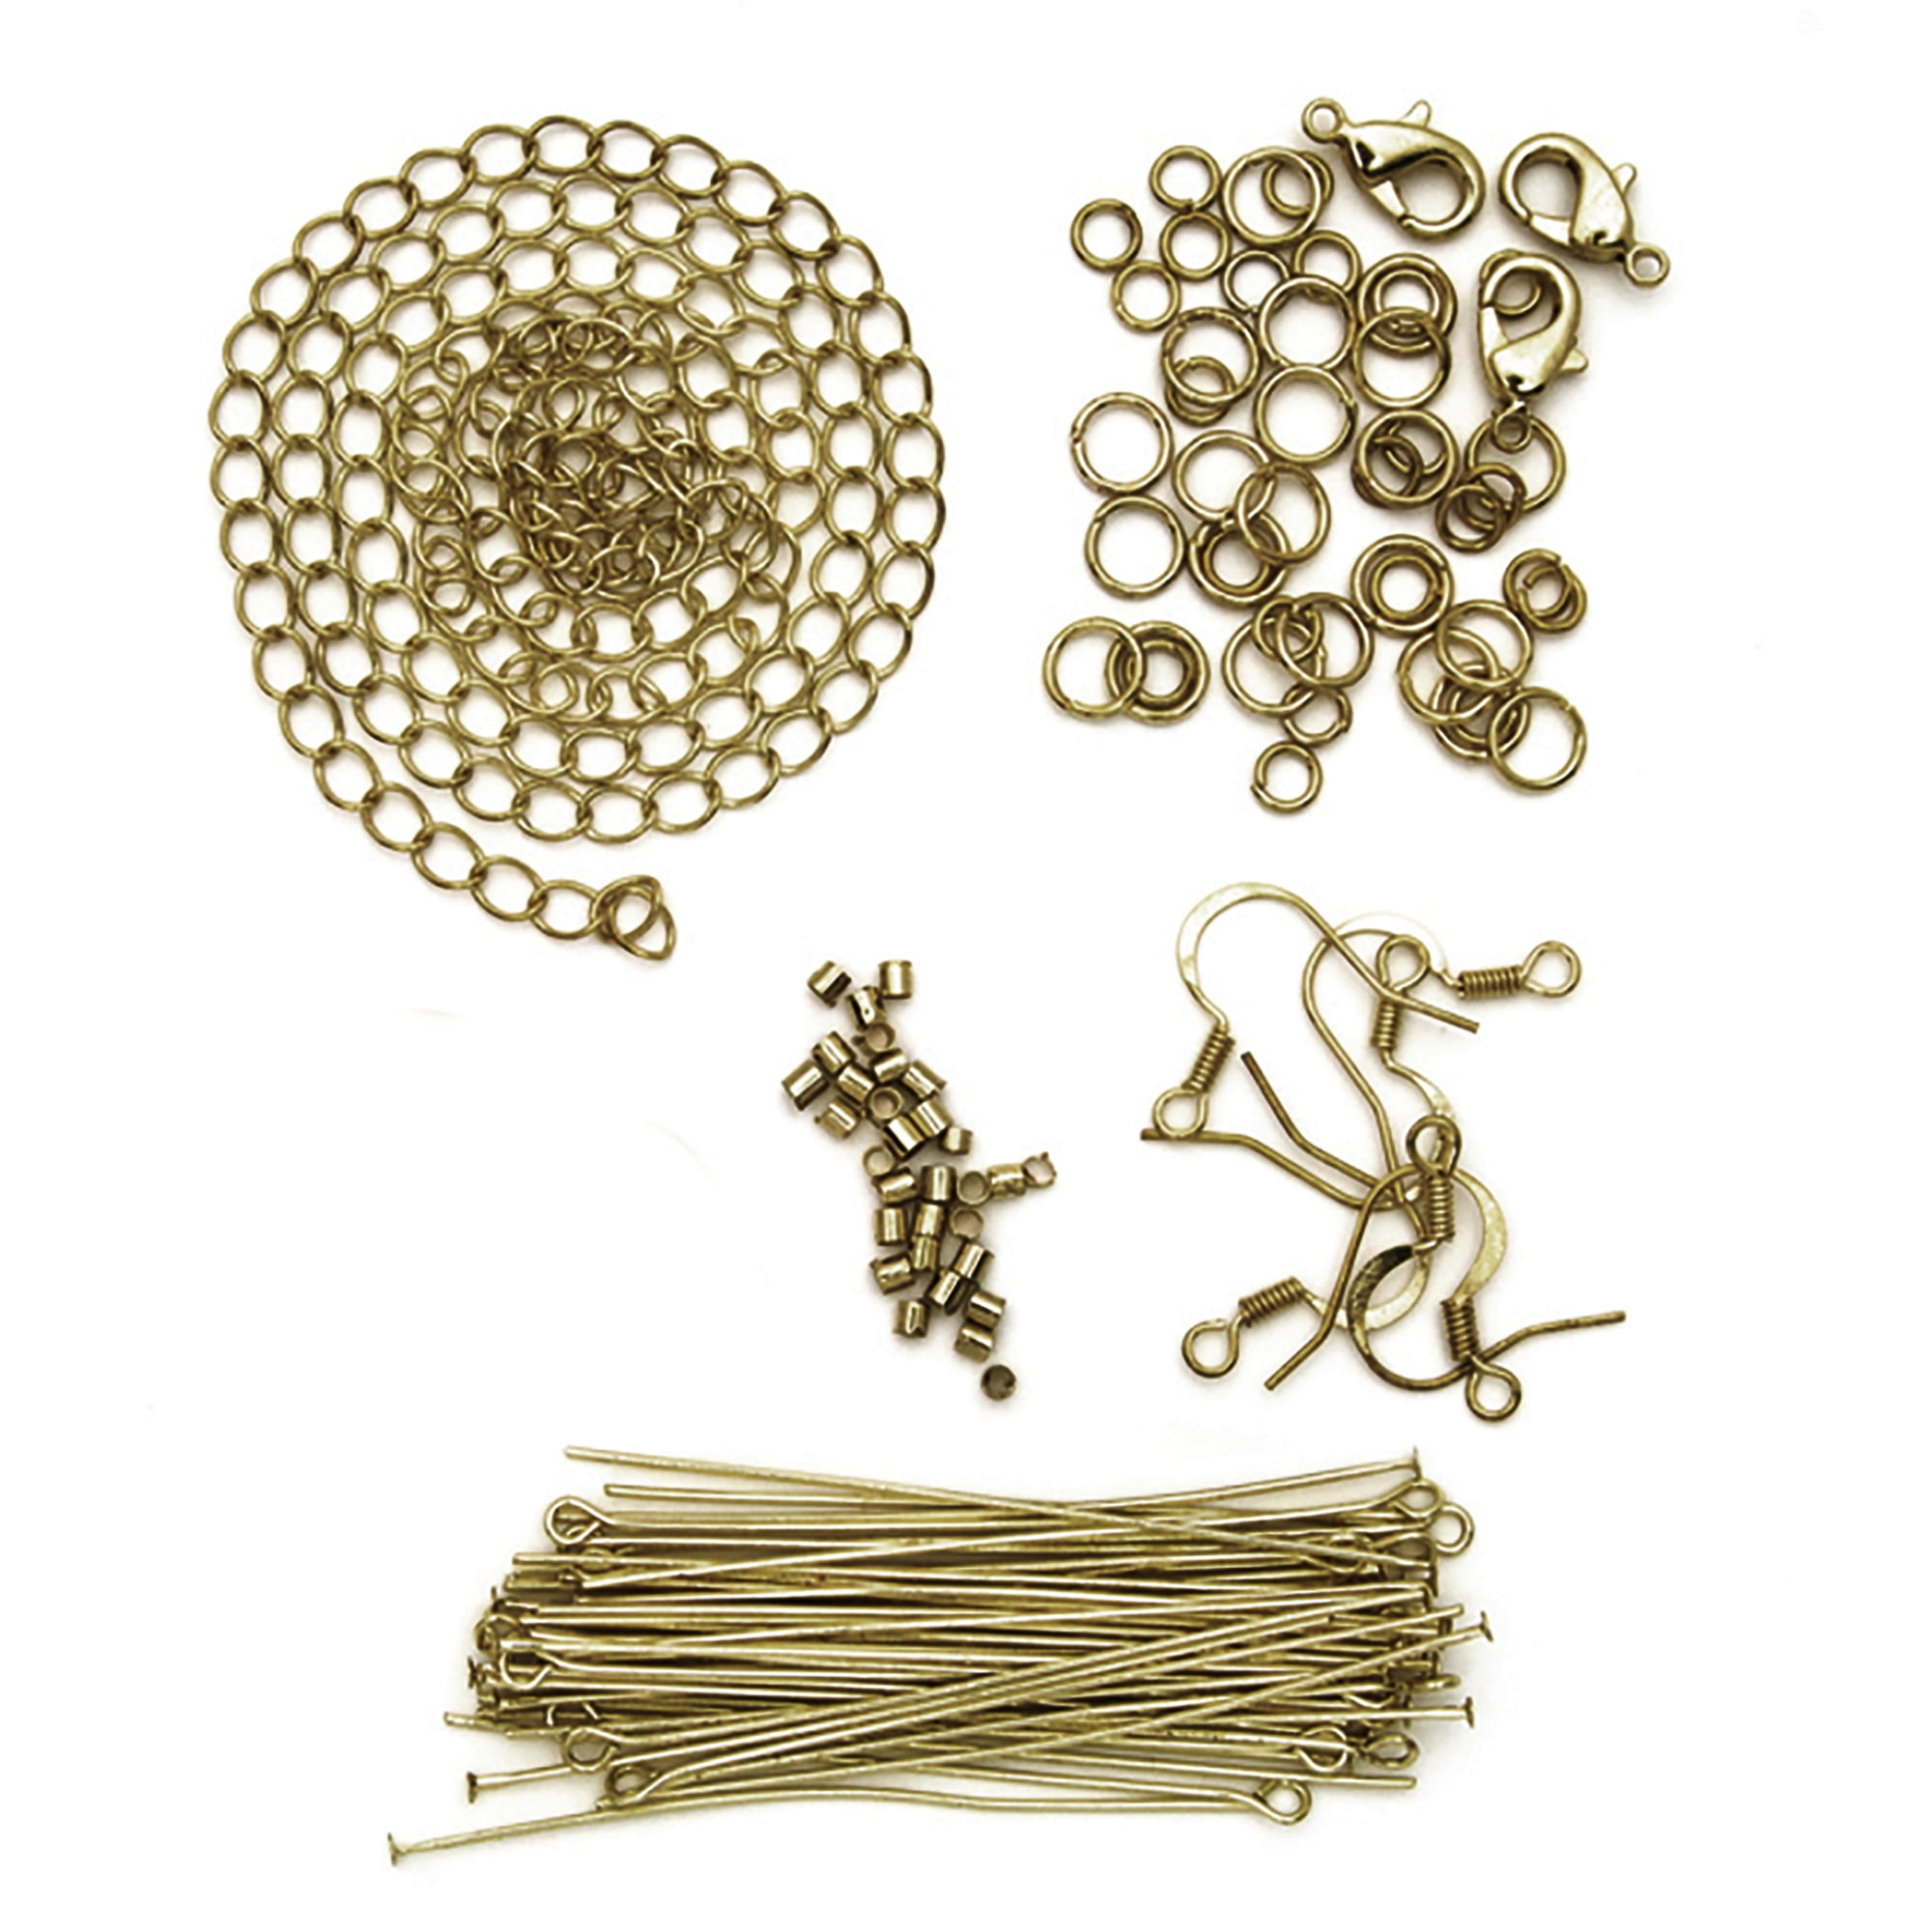 Cousin DIY Metal Jewelry Findings Starter Pack, 75 Piece, Silver Finish 